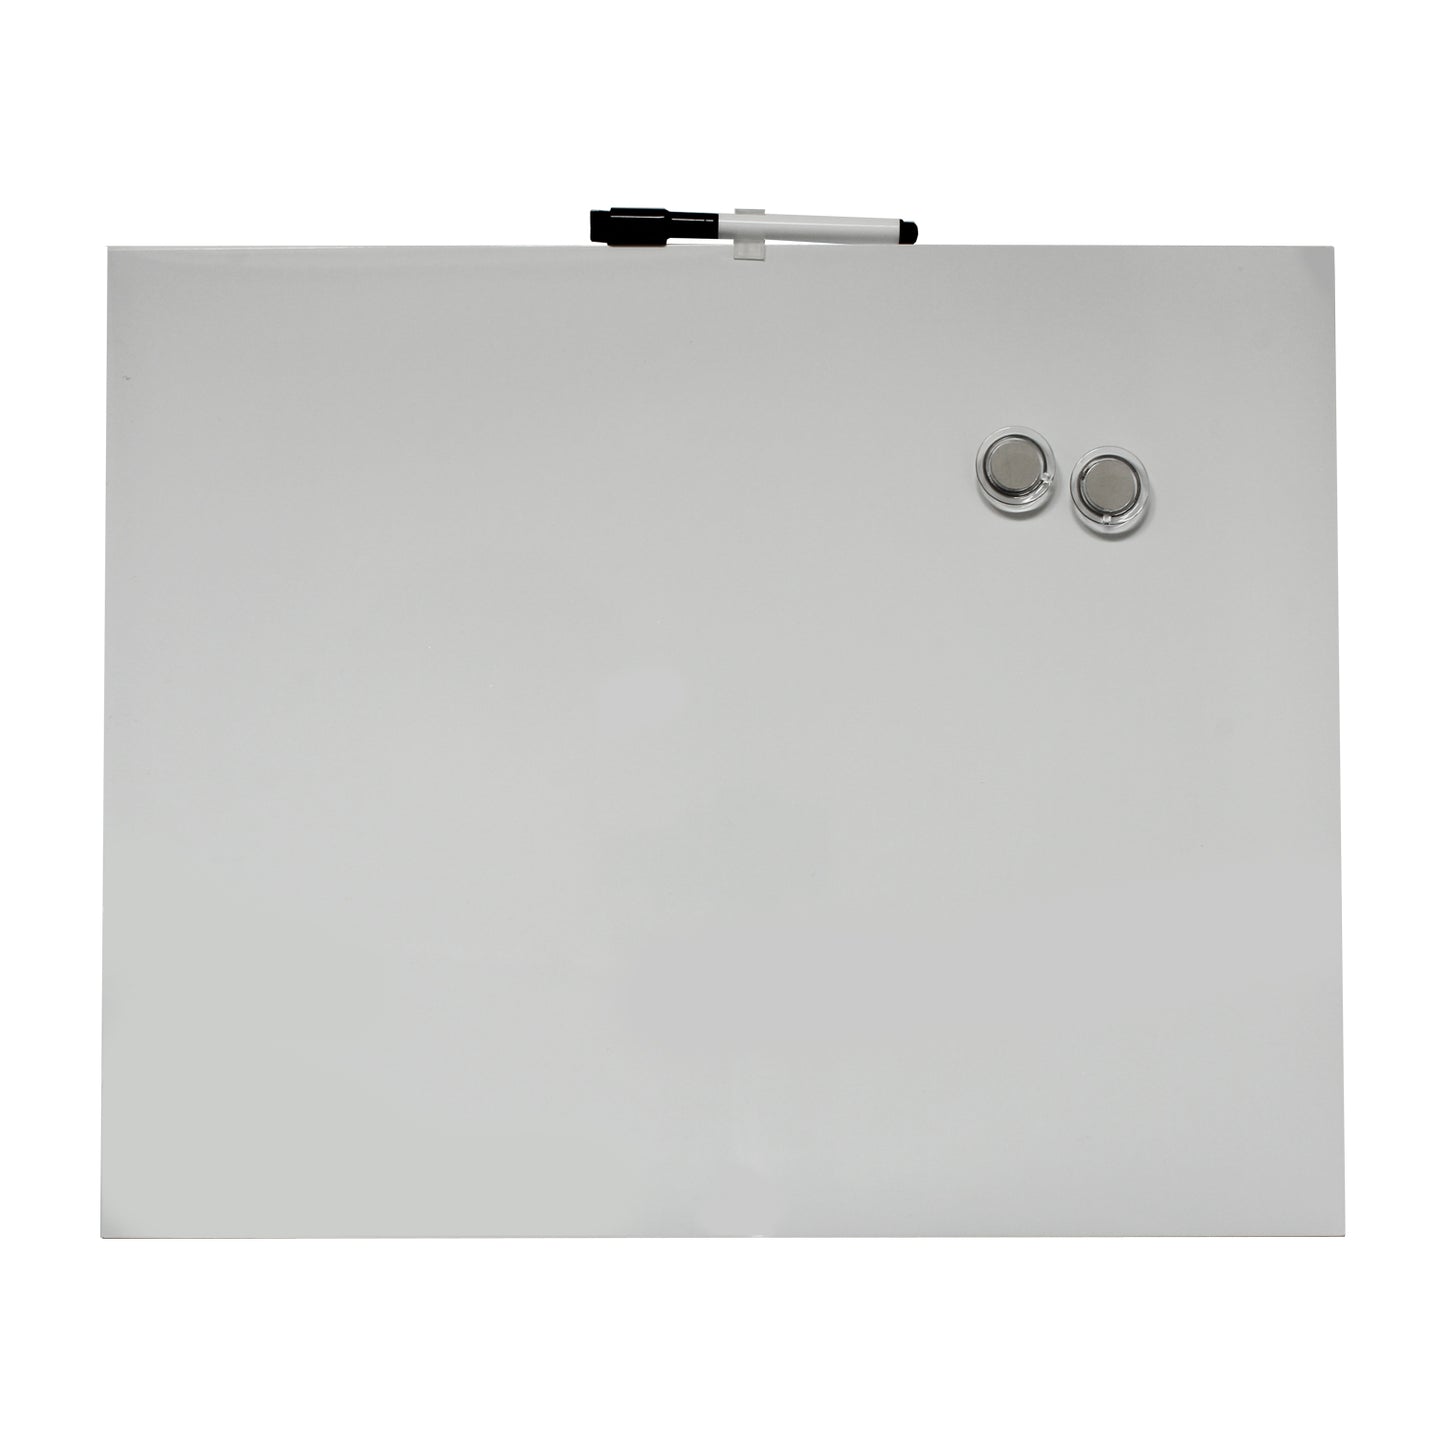 A blank frameless dry-erase board measuring 40 x 51 cm, with 2 transparent, round magnets and a marker with eraser in the lid clipped into mount at the top. The sleek, minimalist design makes it suitable for quick notes or reminders in a home, school, or office setting.